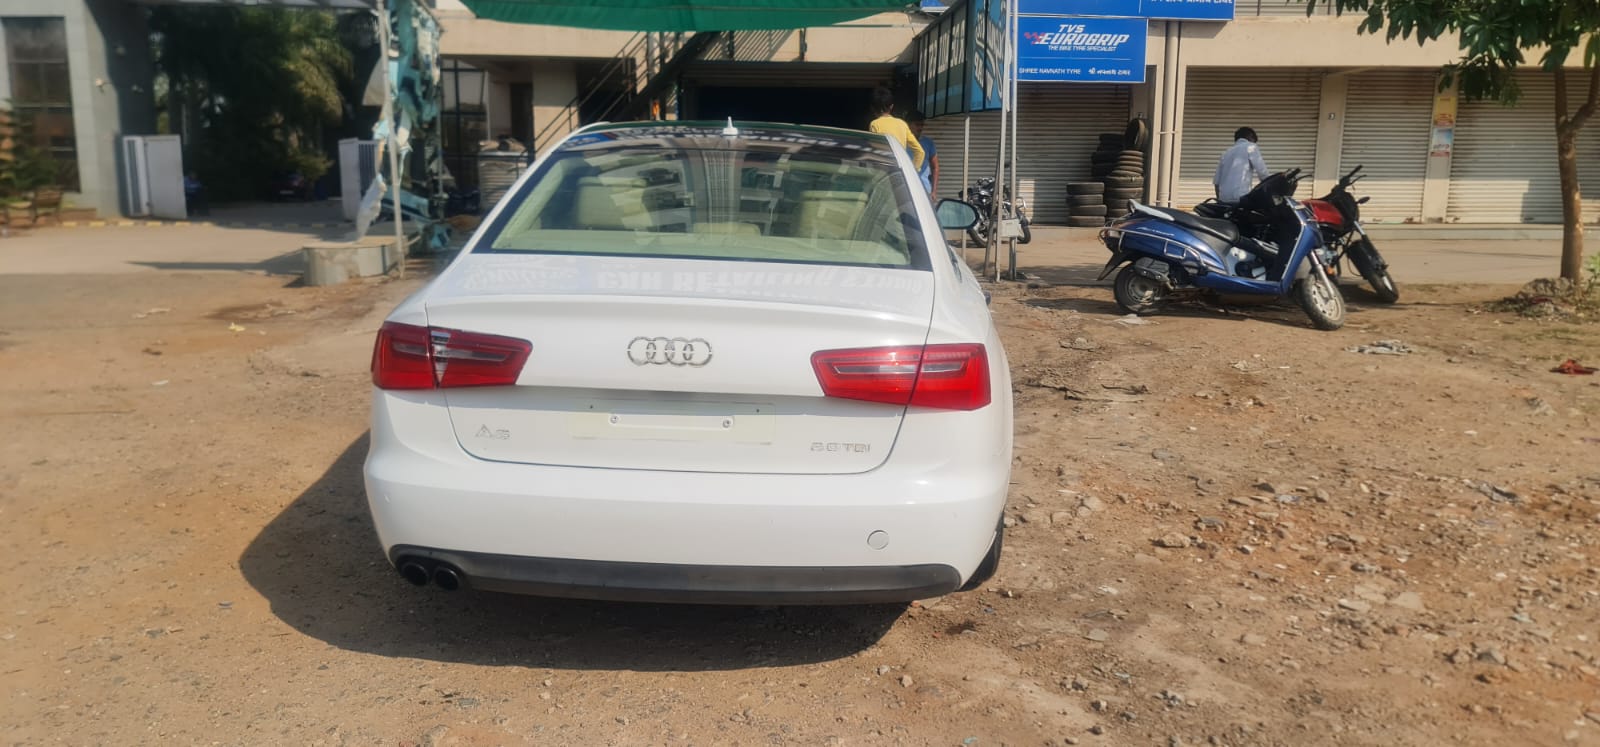 Details View - Four wheeler  photos - reseller,reseller marketplace,advetising your products,reseller bazzar,resellerbazzar.in,india's classified site,Audi a6 first owener 93000 km 